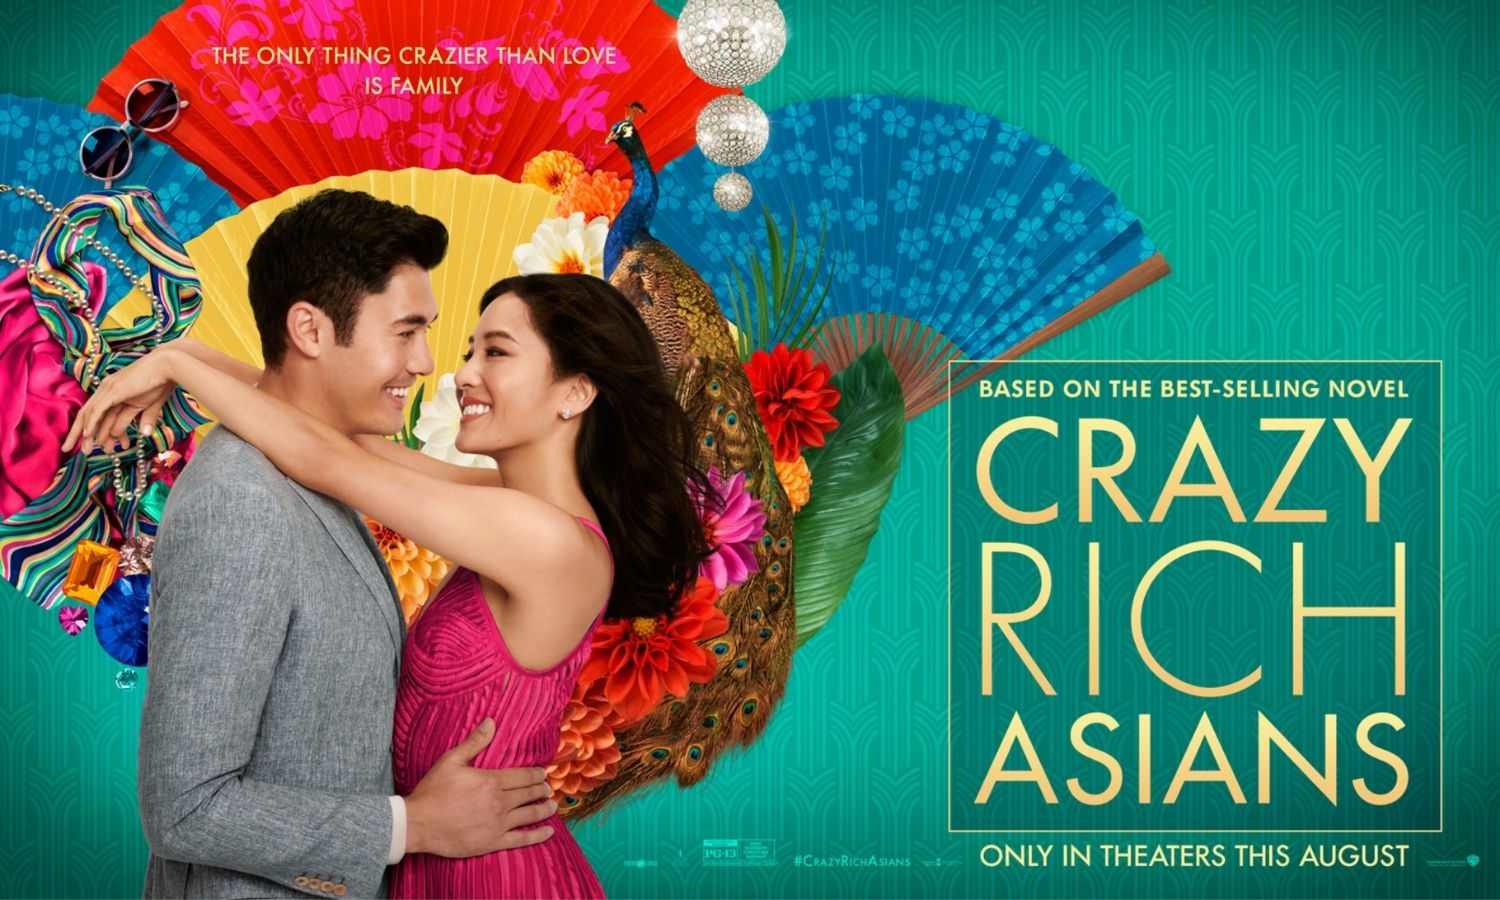 OTD in 2018: Hollywood's first full Asian cast movie called "Crazy Rich Asians" was released.